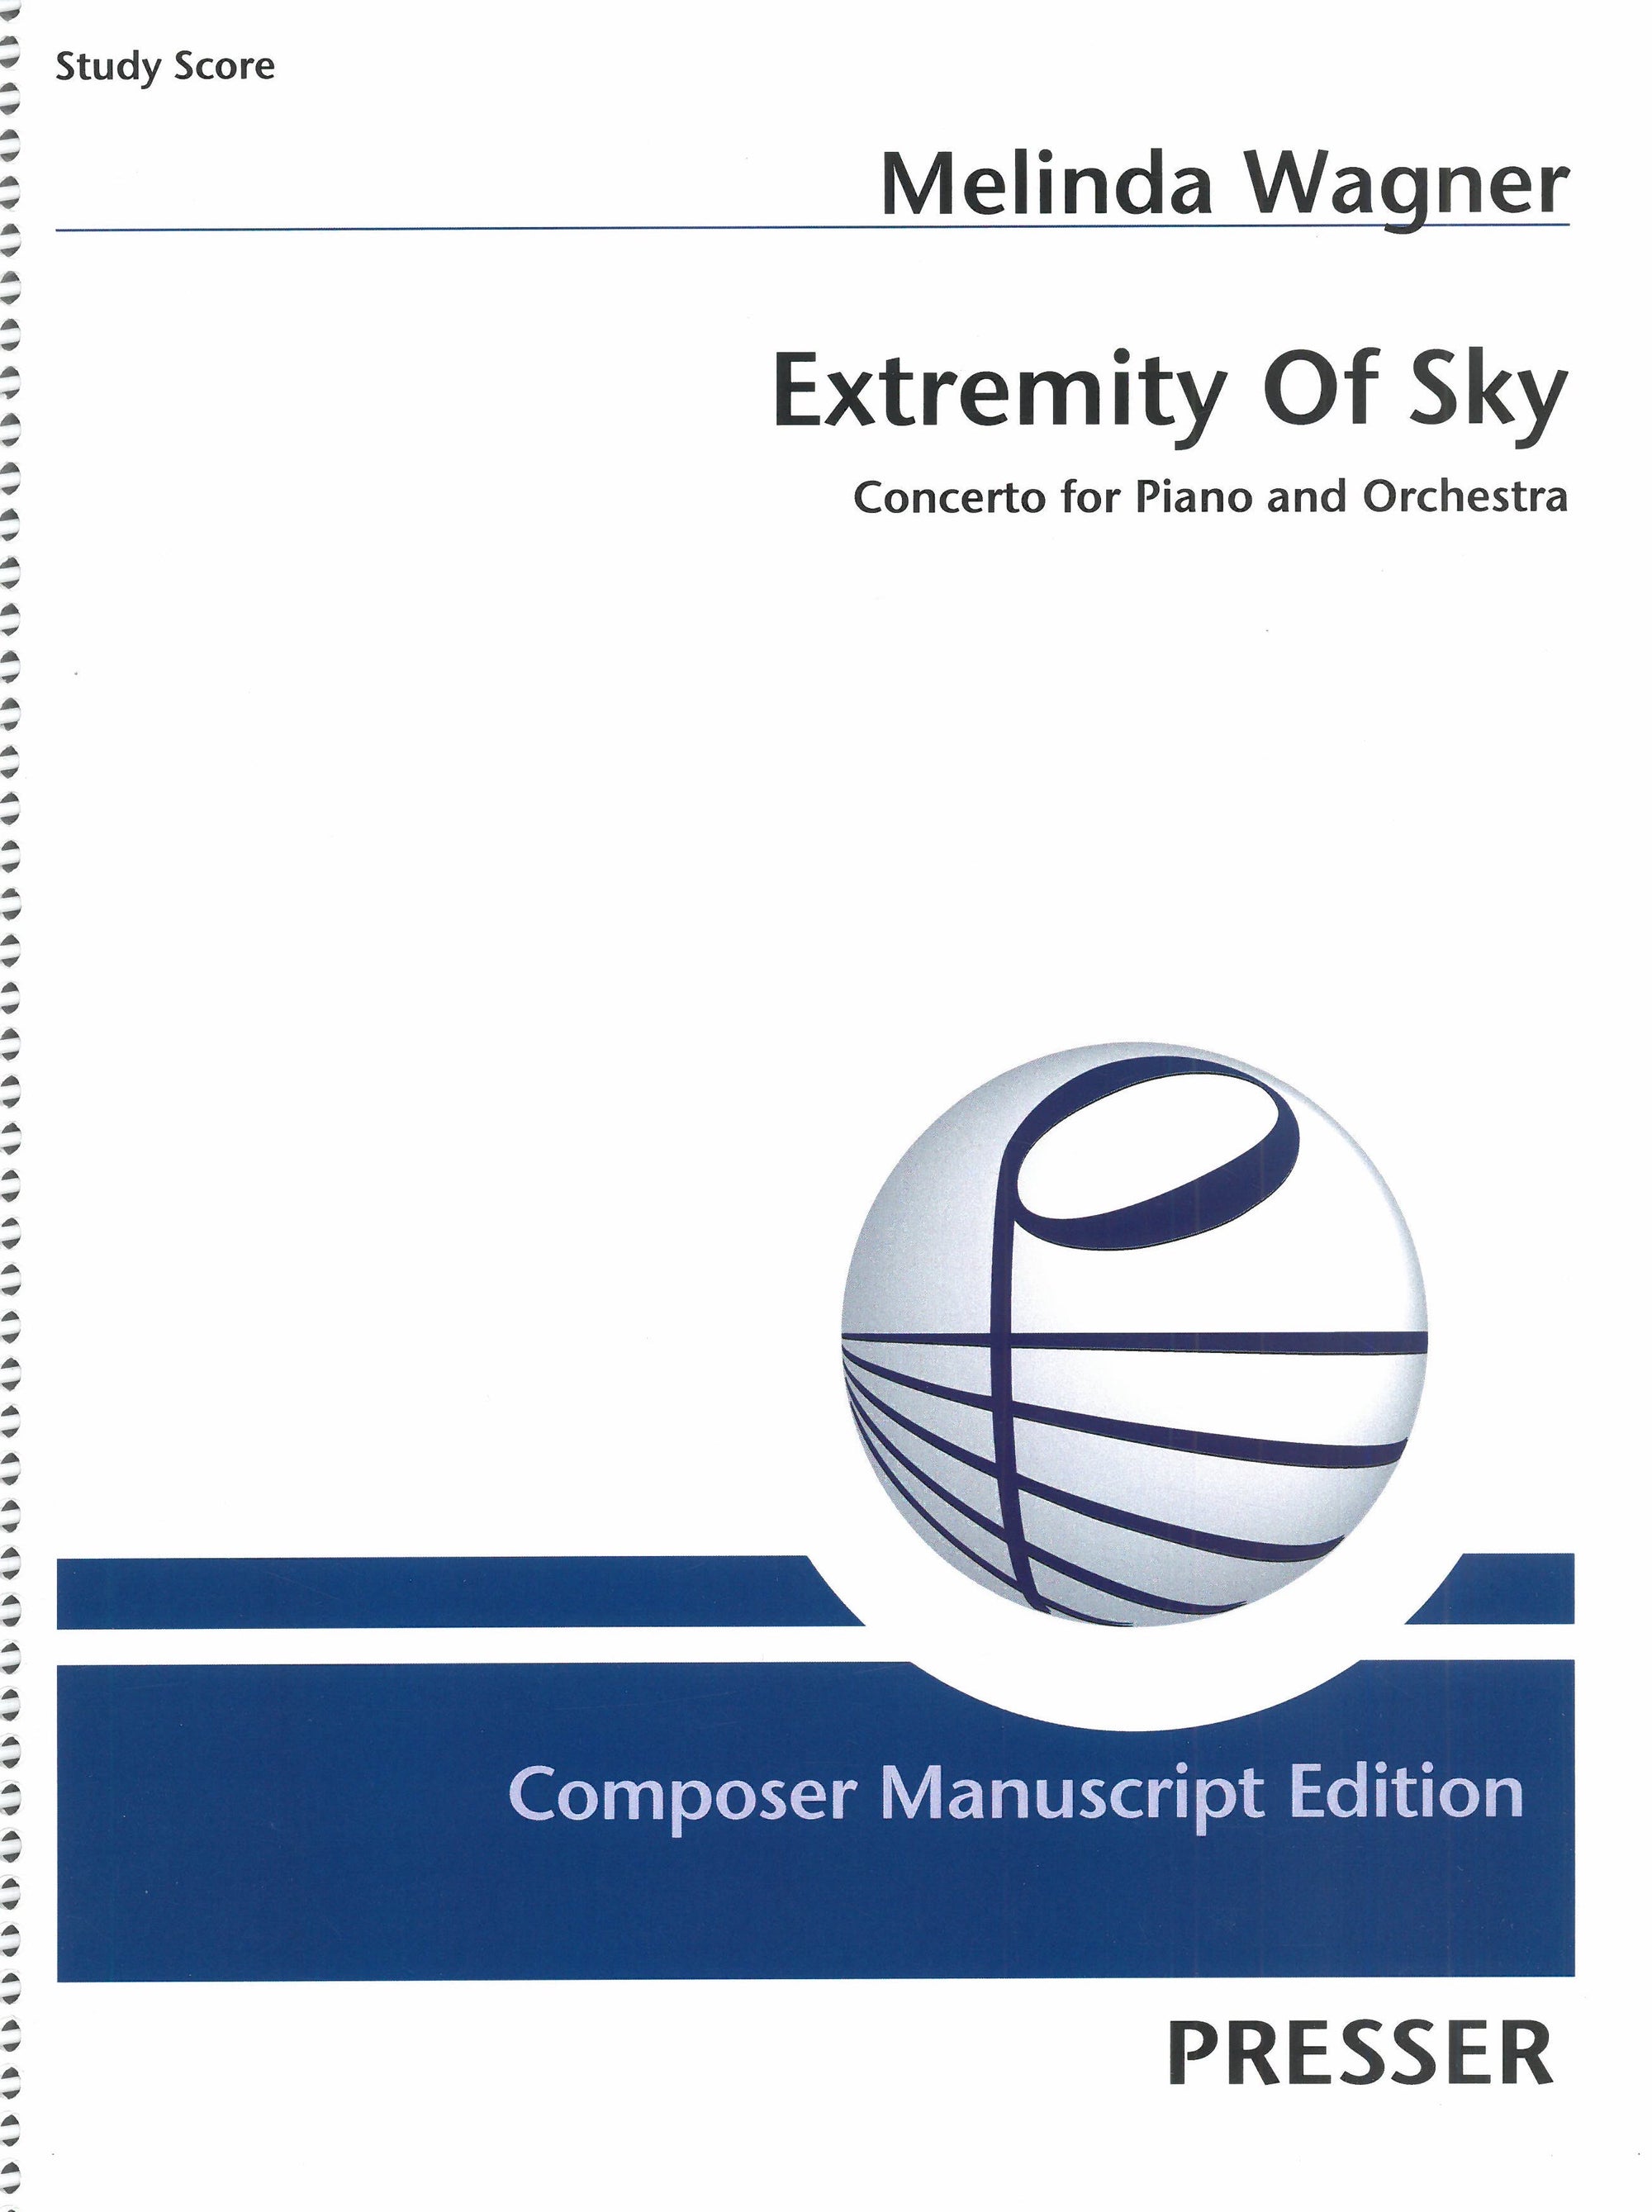 M. Wagner: Extremity of Sky